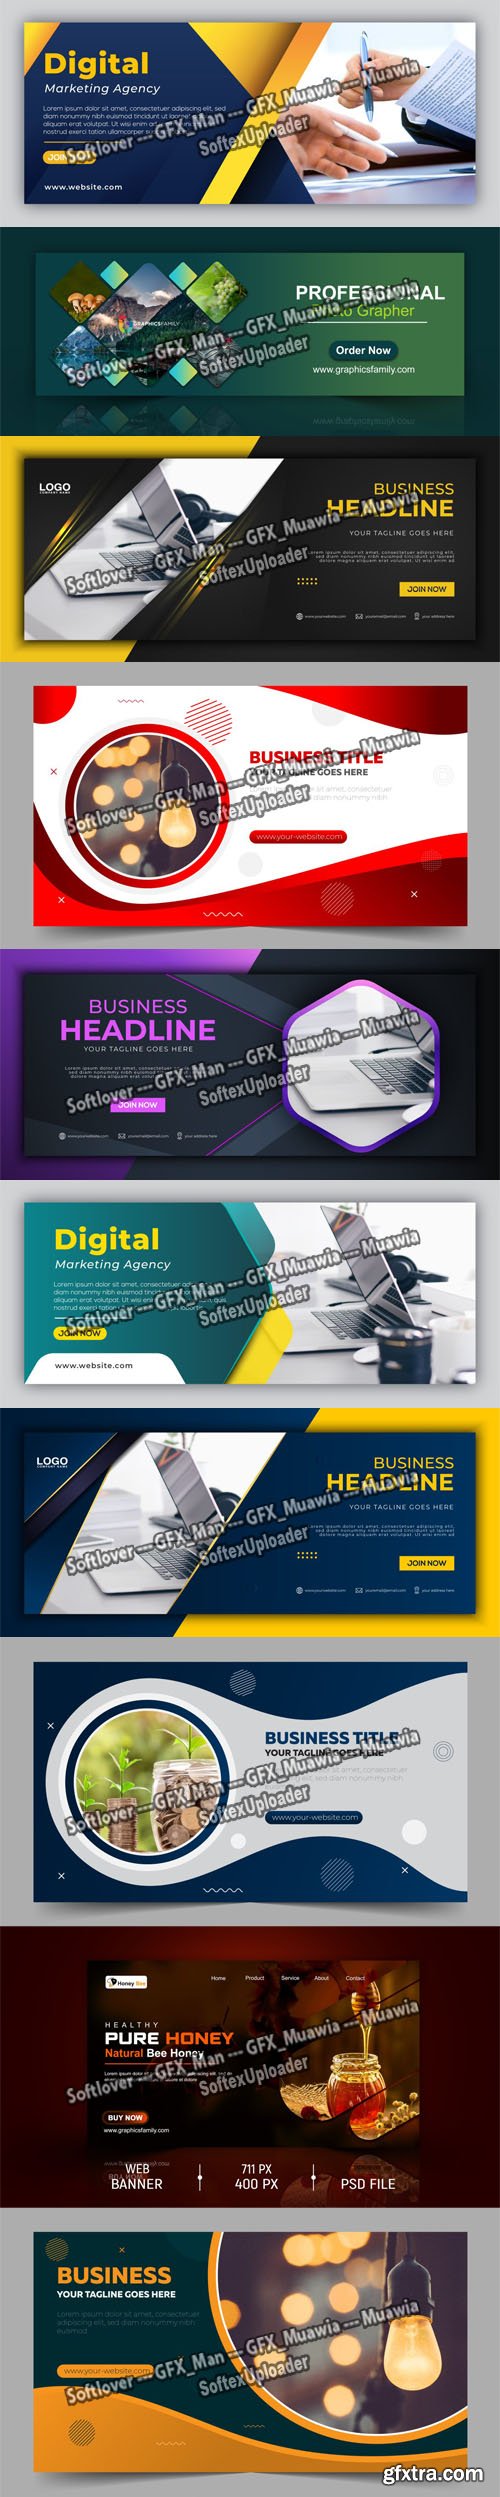 18 Professional Web Banners & Facebook Covers Templates Collection